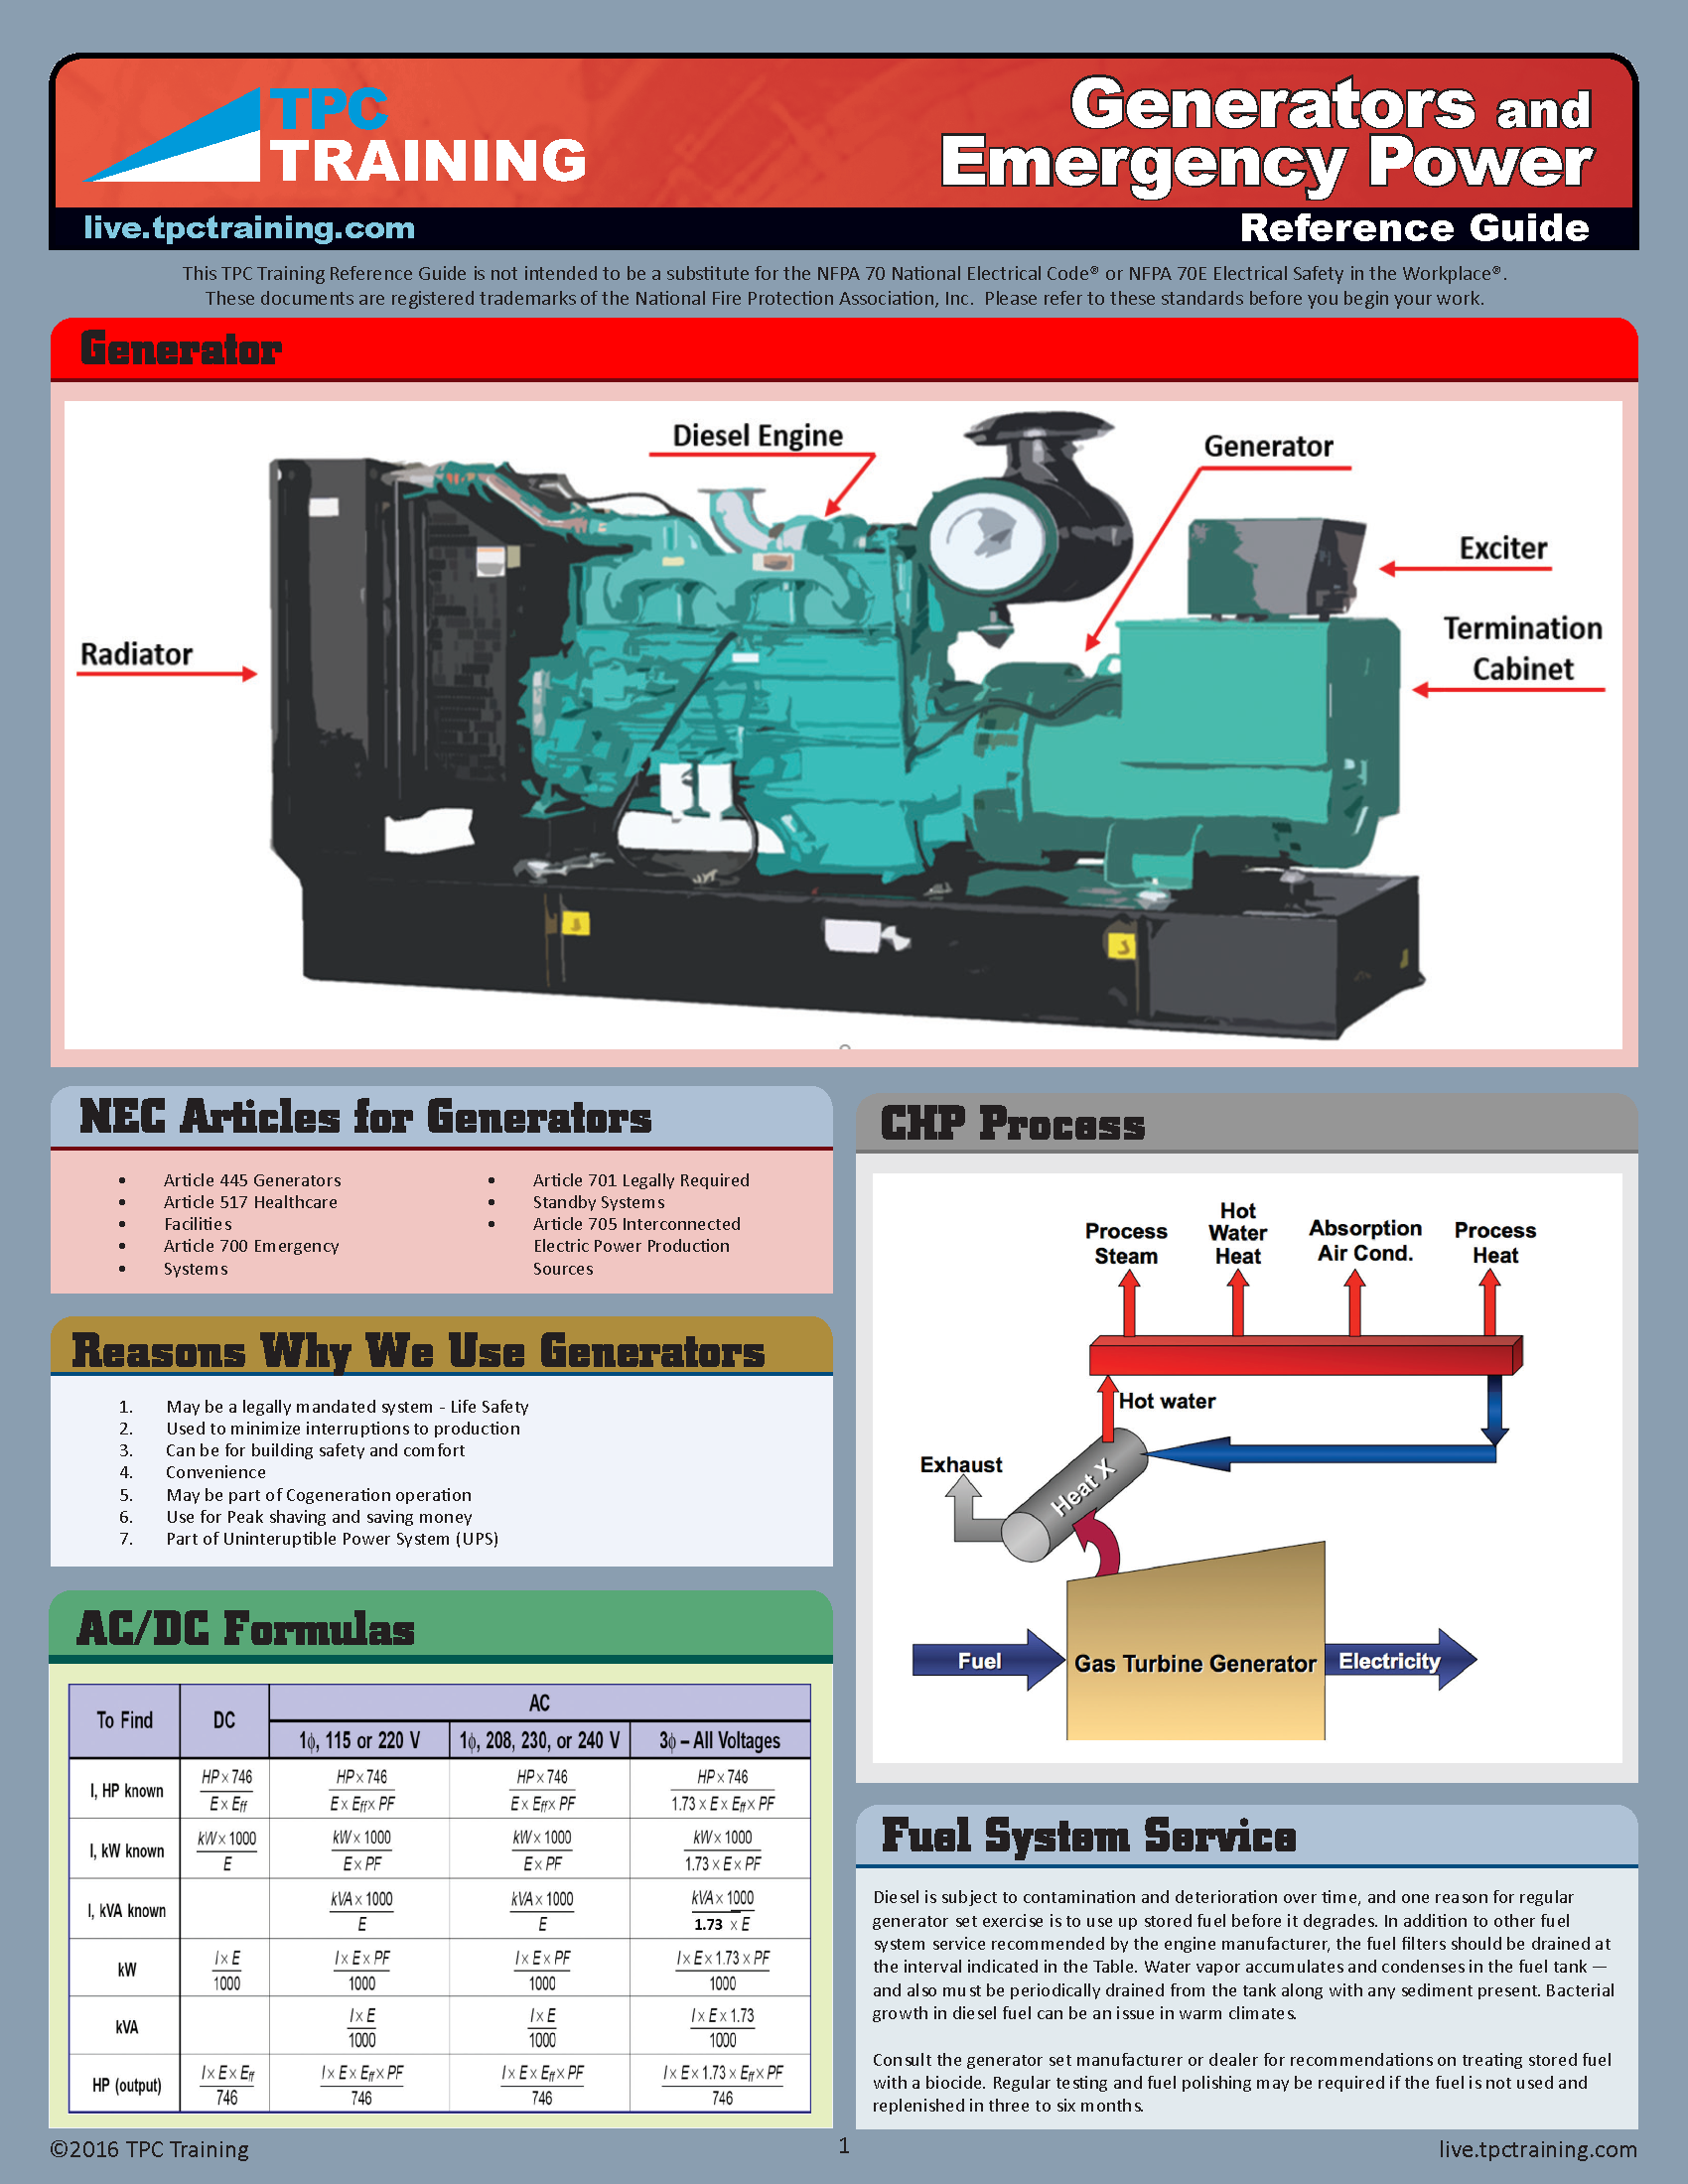 Generators and Emergency Power Quick Reference Guide